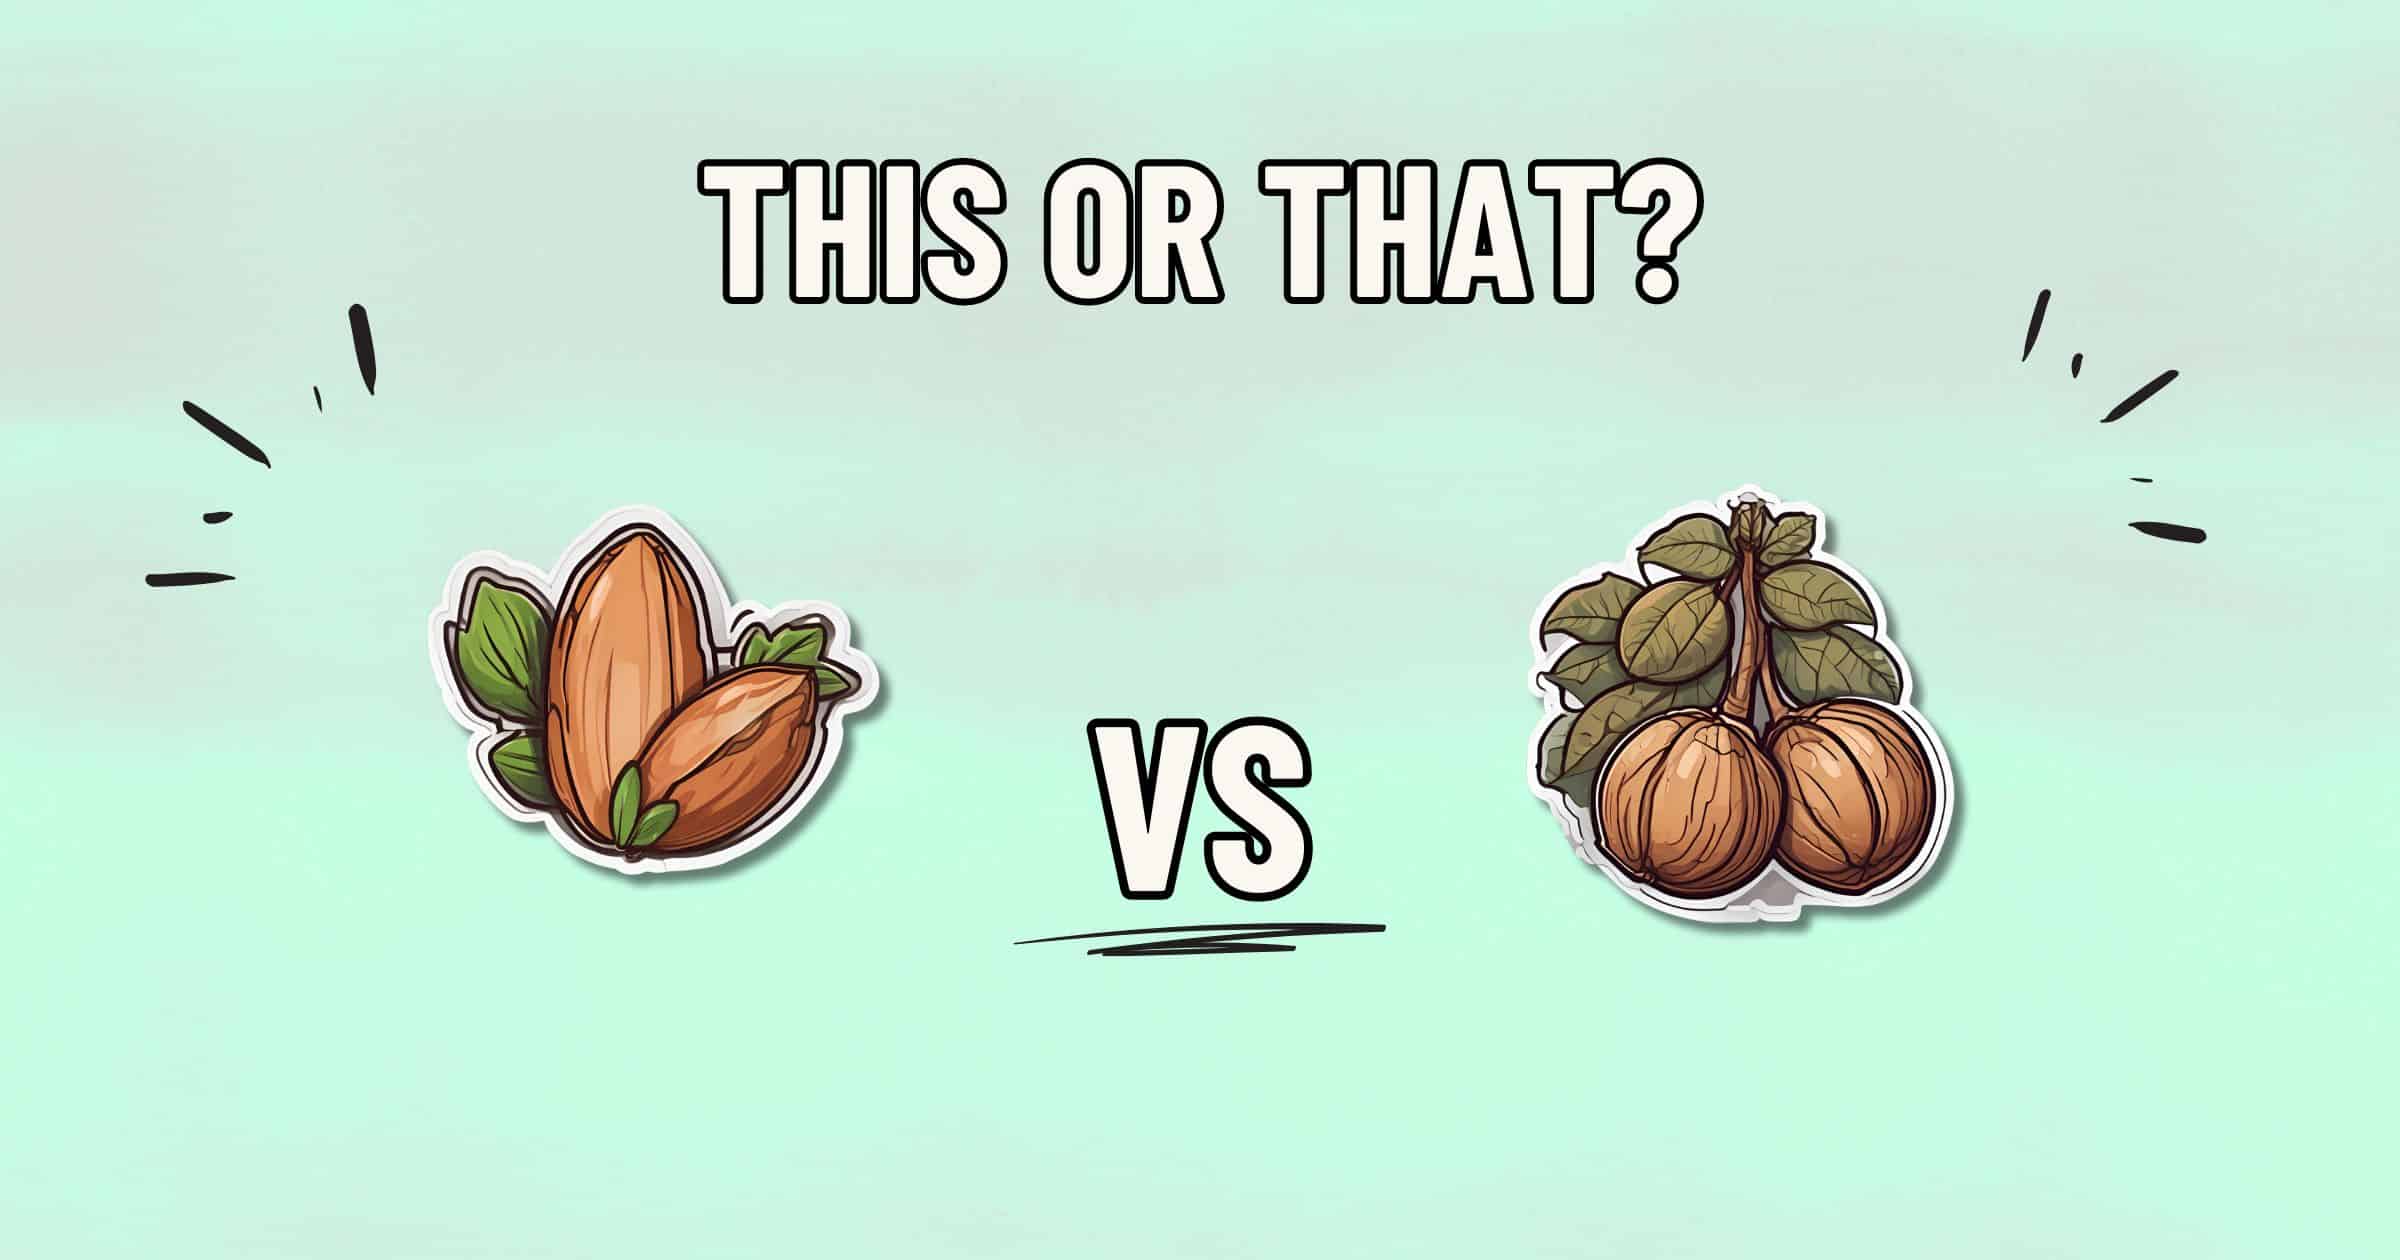 A comparison image with a light green background showing two types of nuts. On the left, healthier almonds are depicted with leaves, while on the right, walnuts are shown with leaves. The text "THIS OR THAT?" is above, and "VS" is in the middle, suggesting a choice between the two.